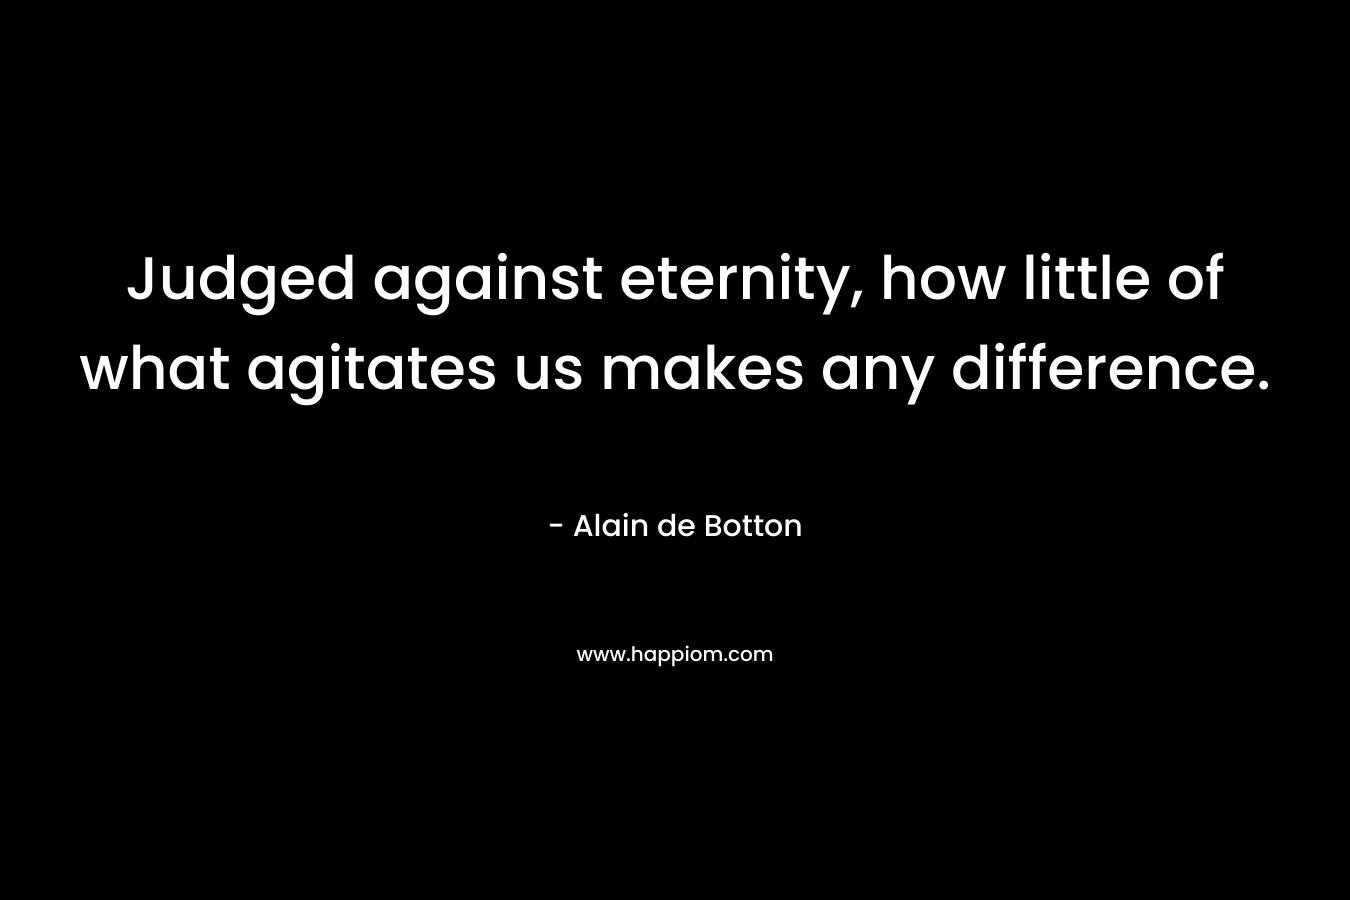 Judged against eternity, how little of what agitates us makes any difference. – Alain de Botton